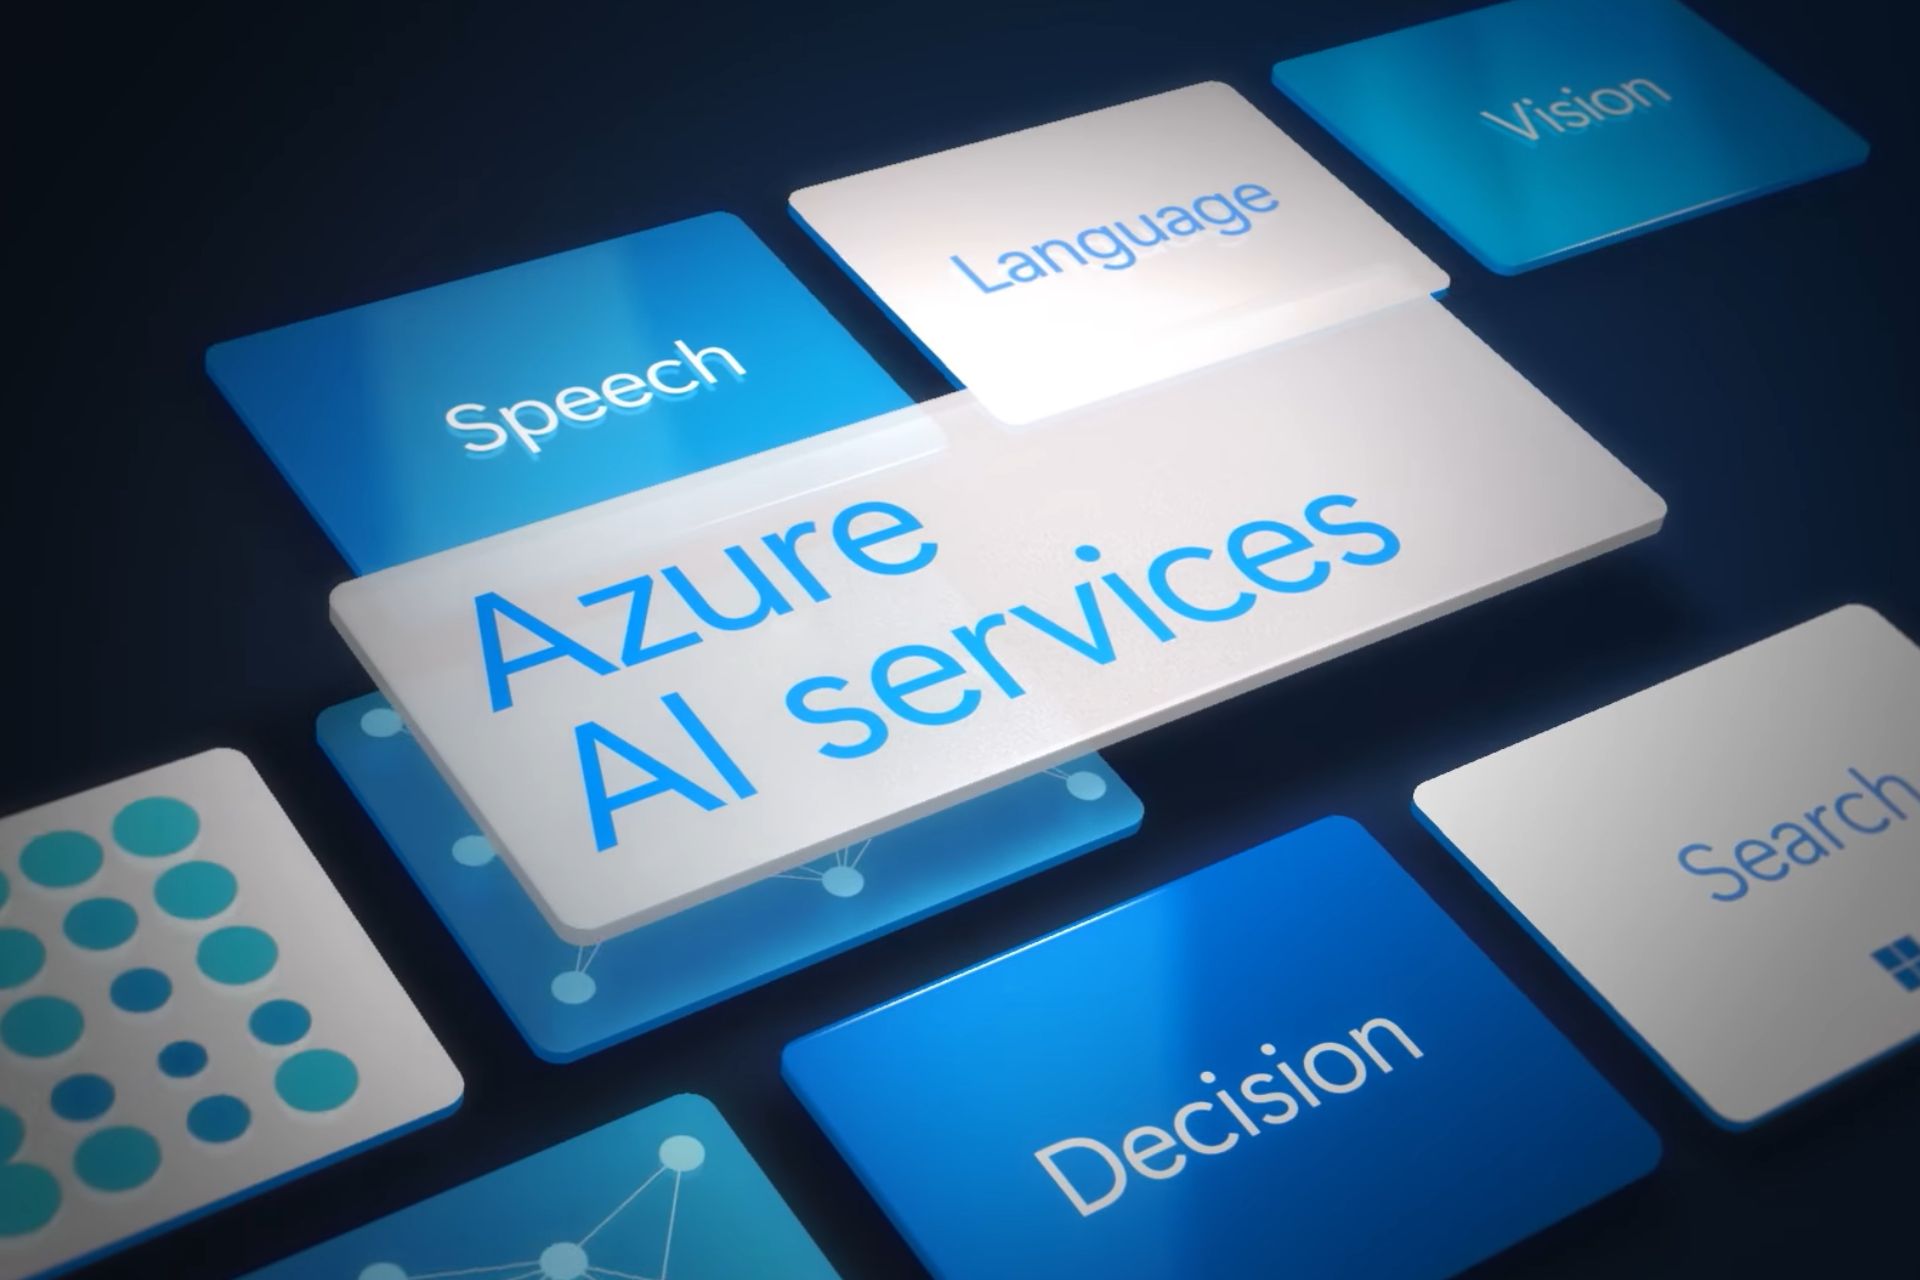 Microsoft adds 9 more AI voices for Azure AI services users in all regions